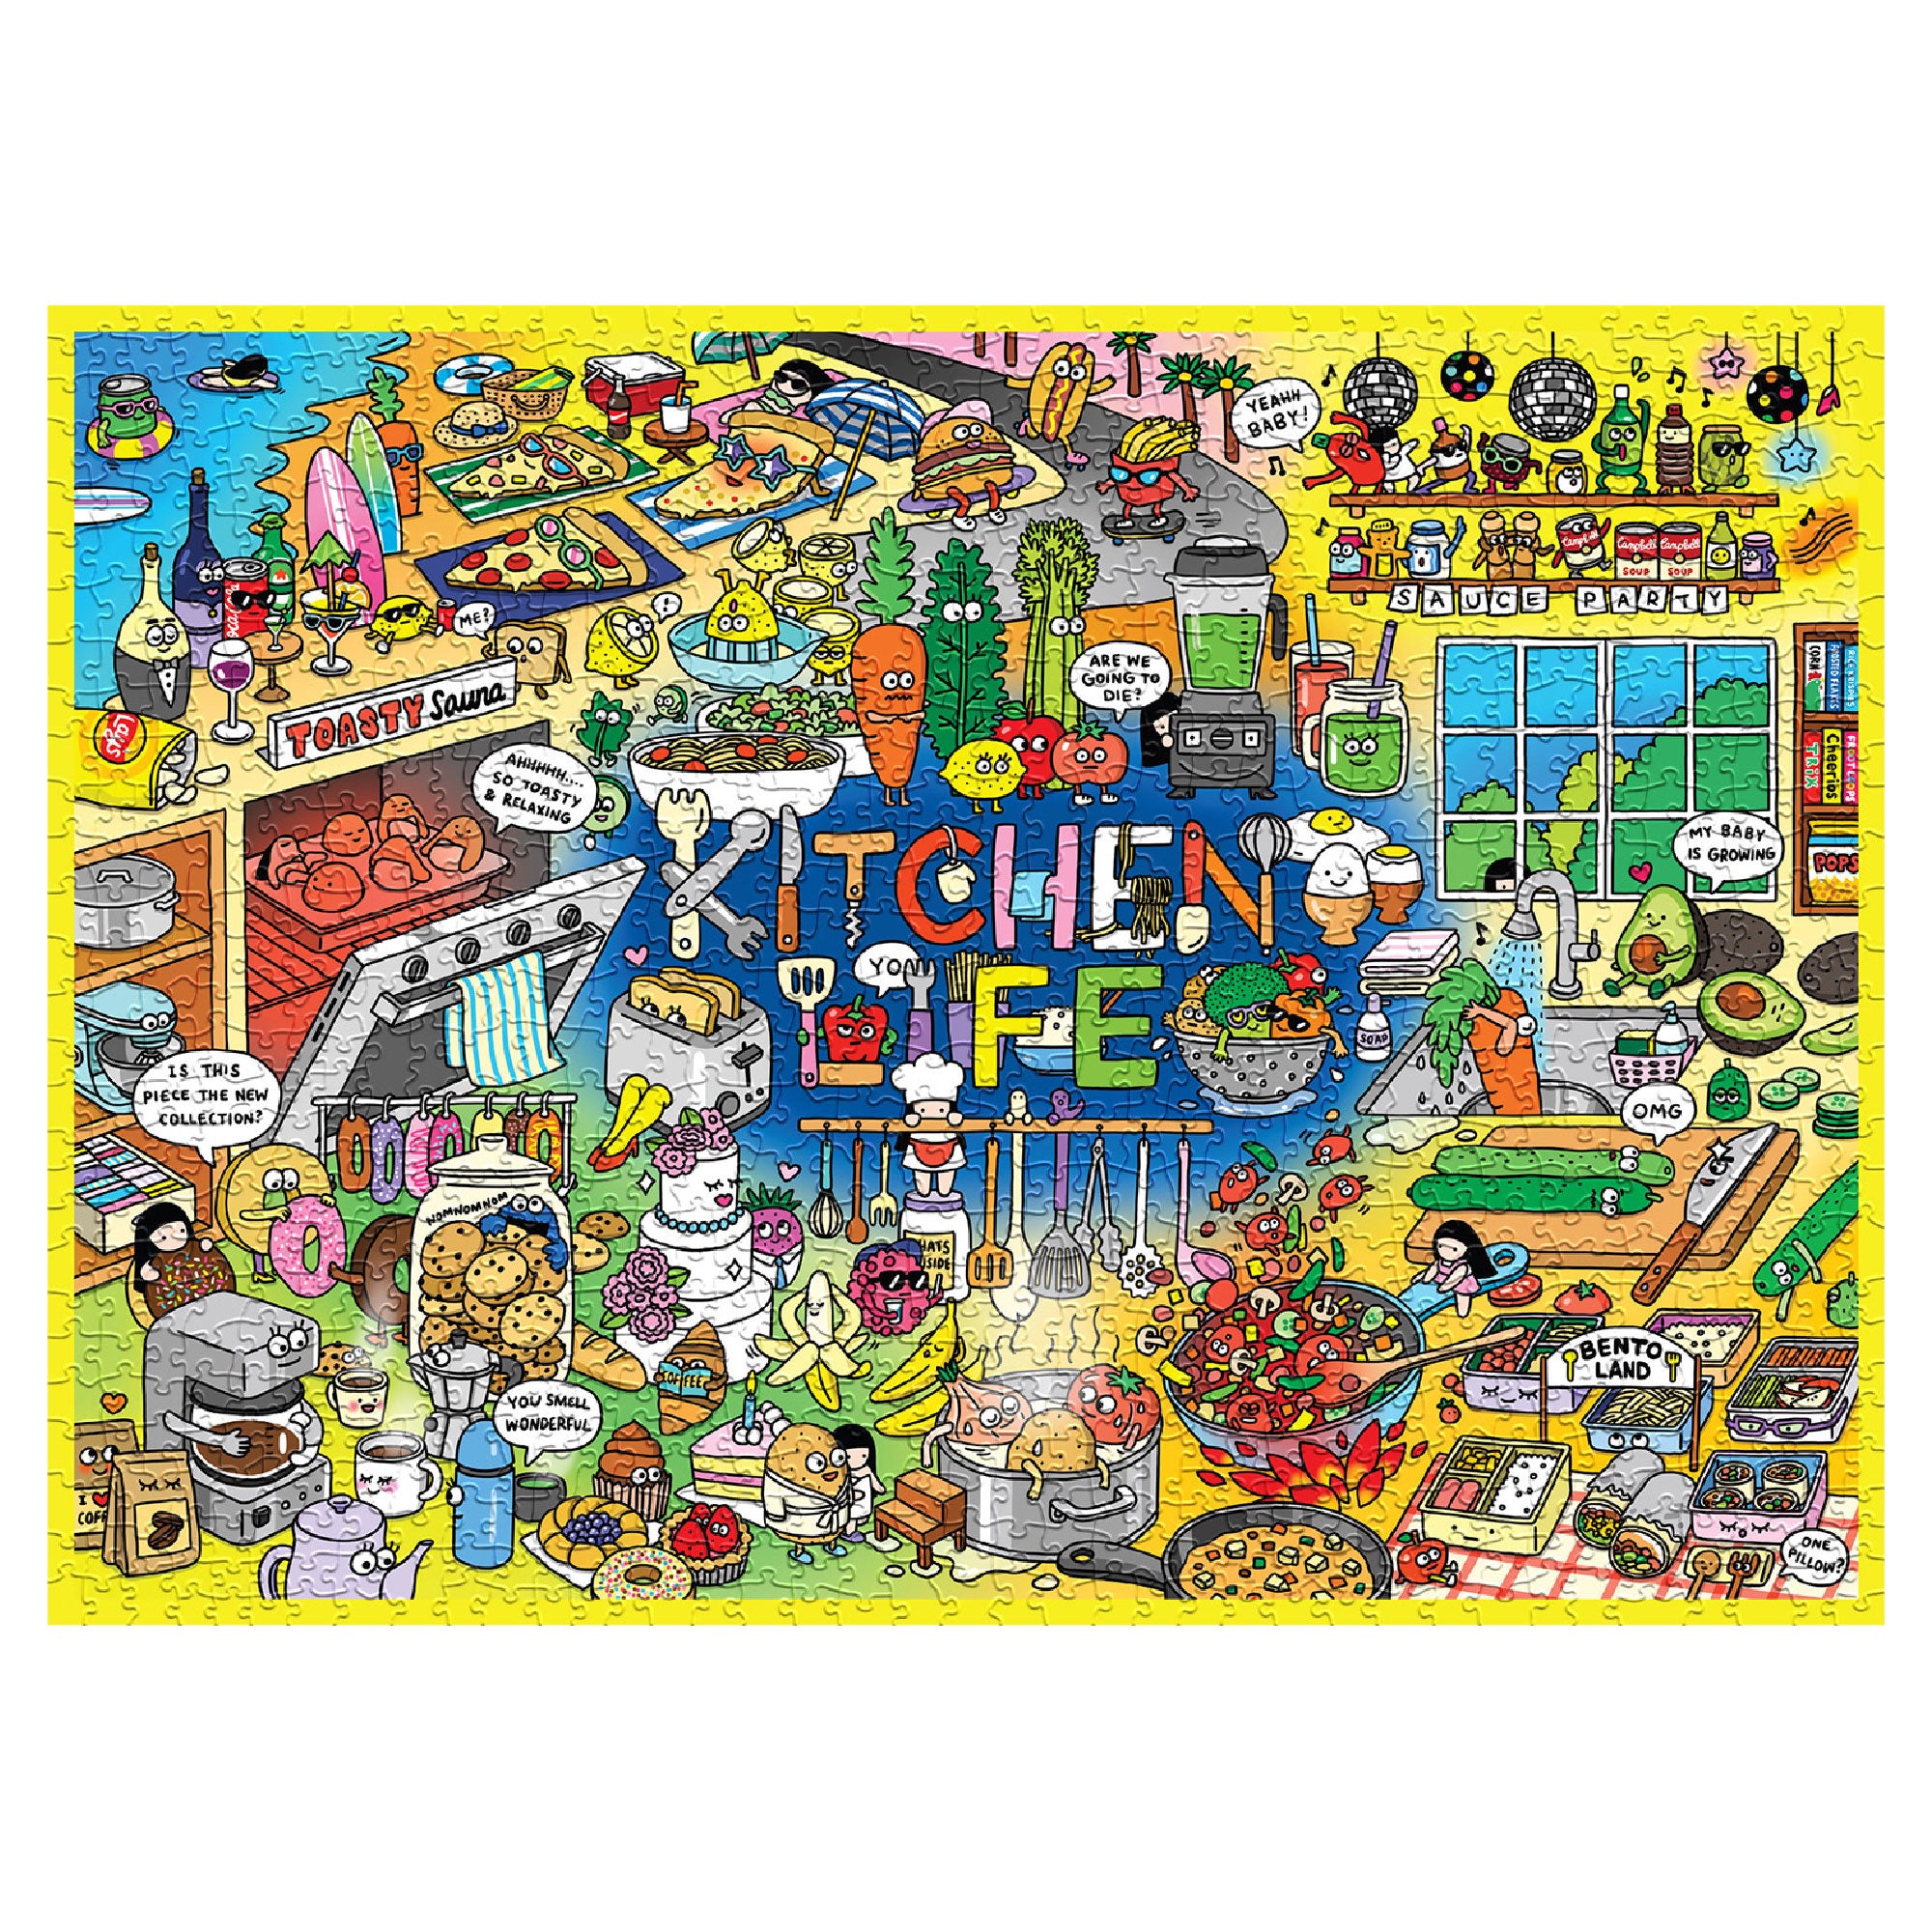 SOONNESS 1000 piece puzzle for adults Soon Cho Kitchen Life cartoon illustration